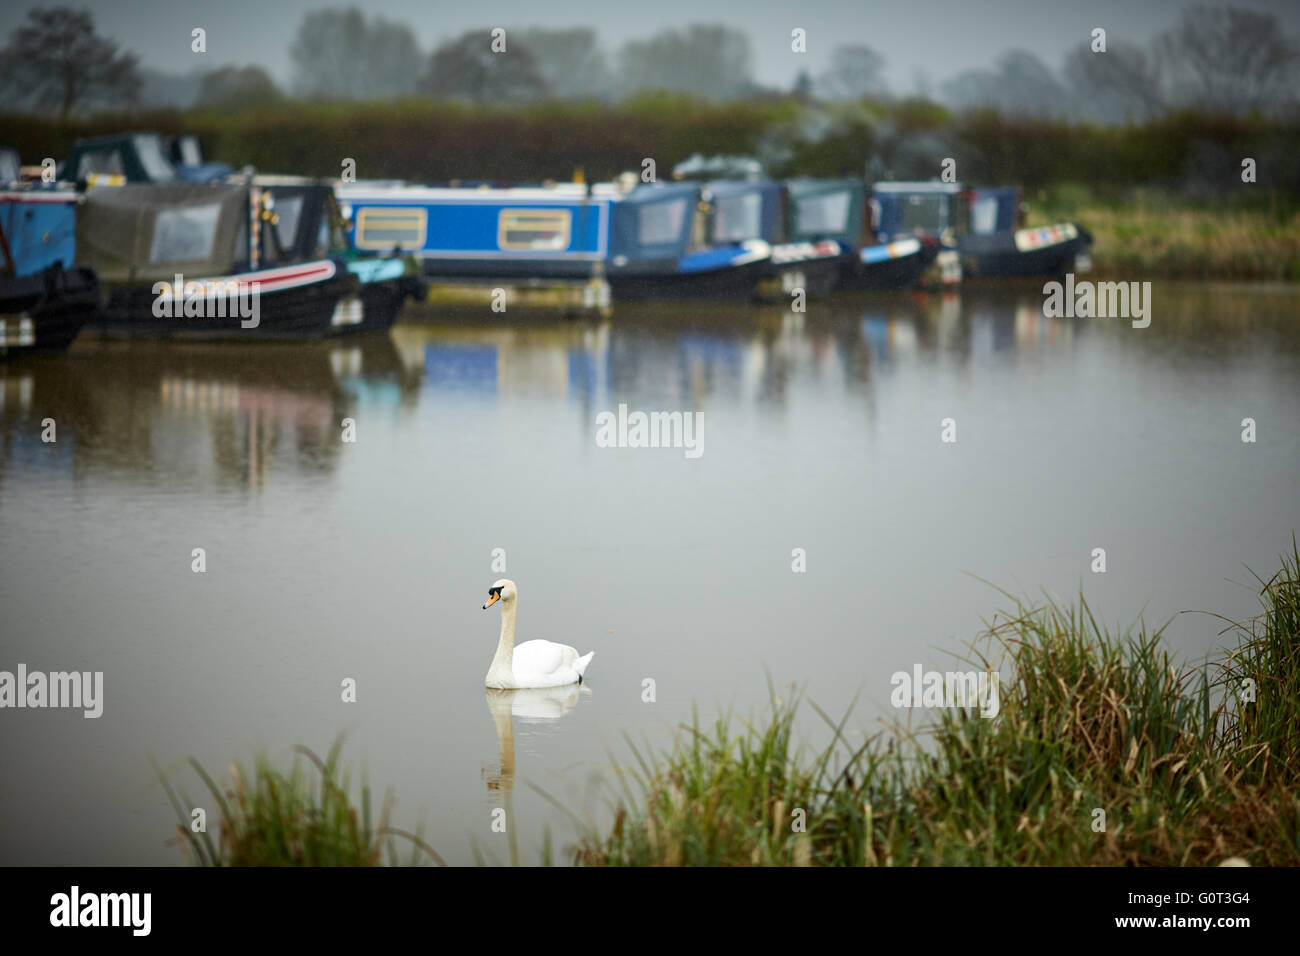 Overwater Marina, Coole Lane, Newhall, Nantwich, Cheshire waterway dull wet day weather grey gray swan single in water lines of Stock Photo